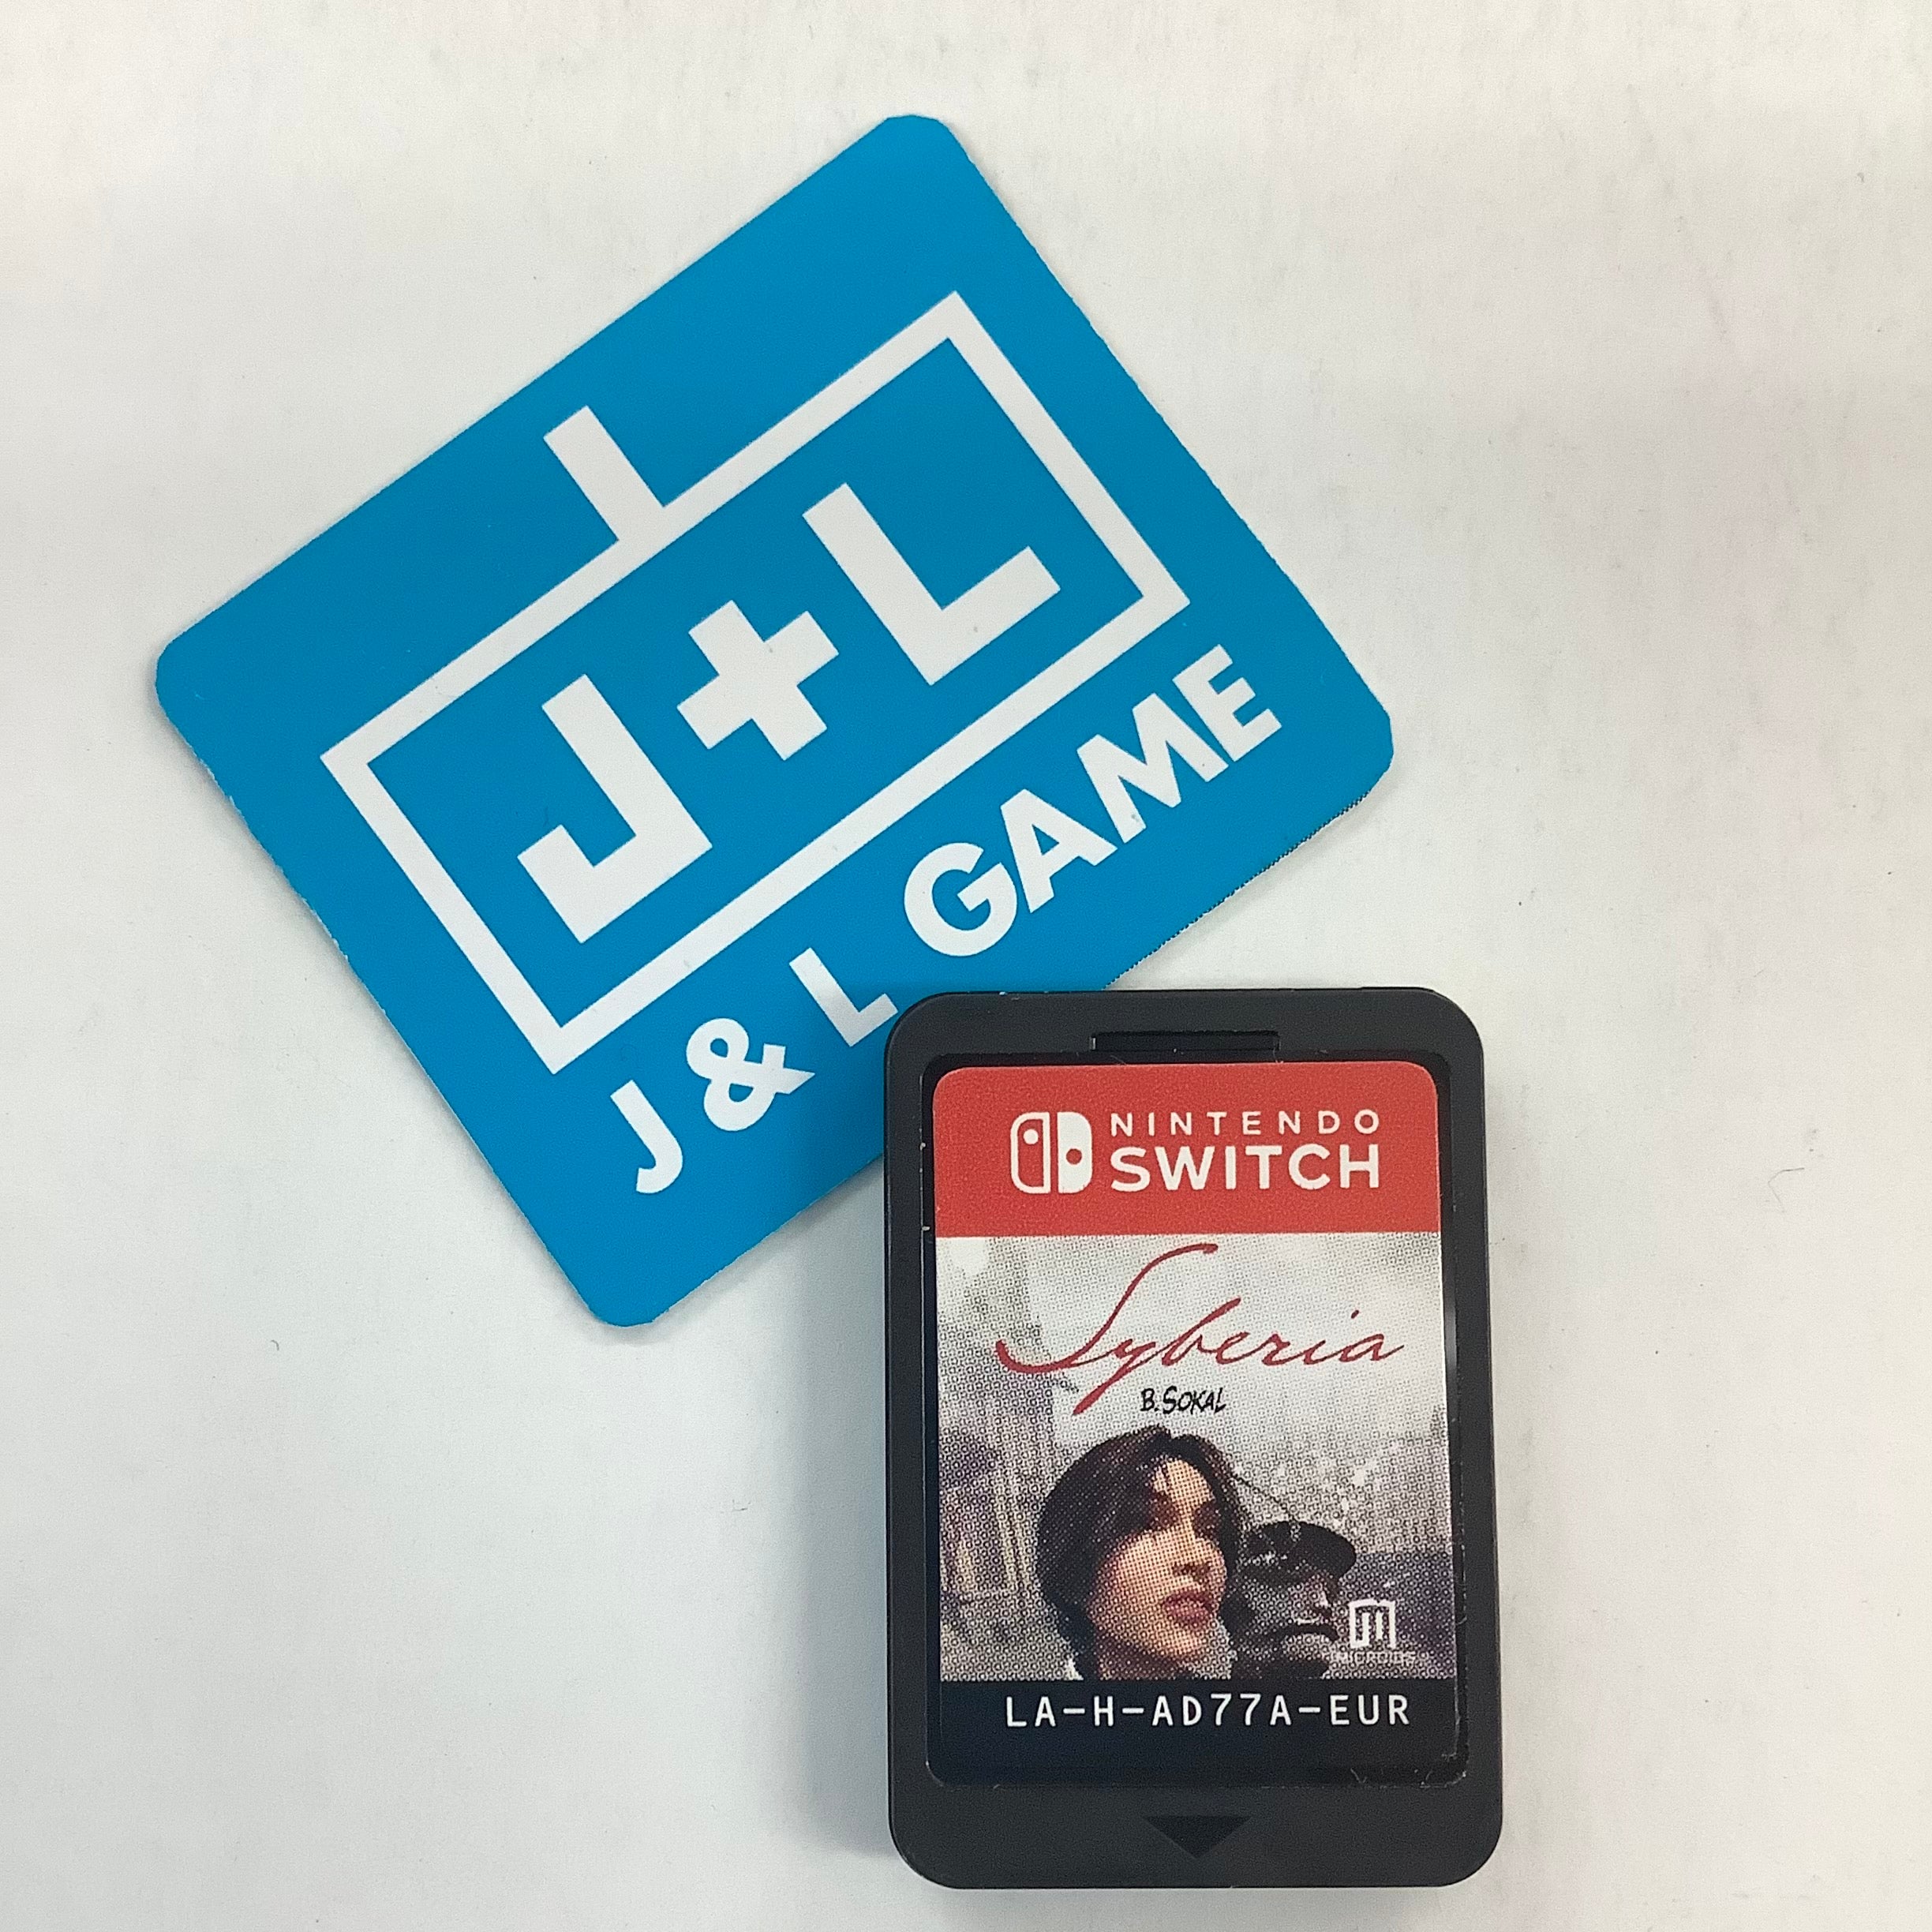 Syberia - (NSW) Nintendo Switch [Pre-Owned] (European Import) Video Games Microids   